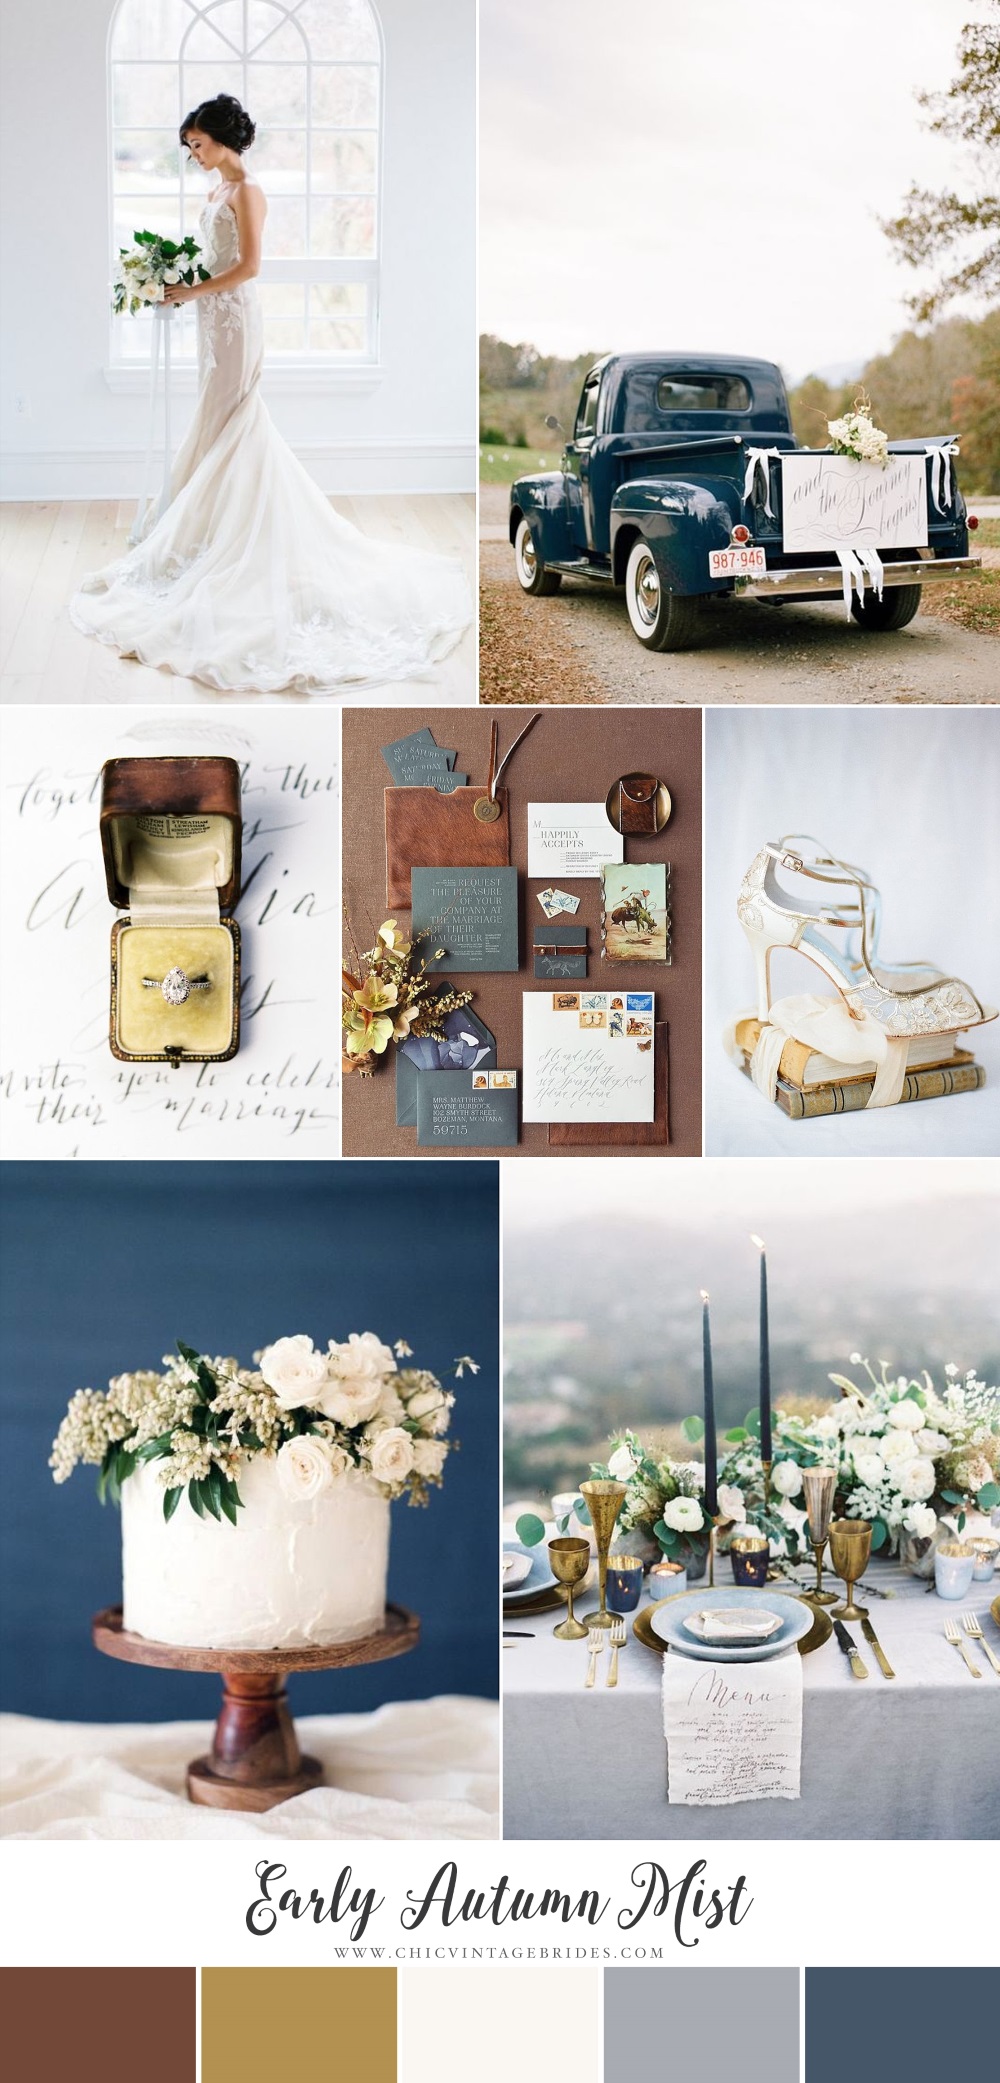 Early Autumn Mist - Fall Wedding Inspiration with Rustic Elegance